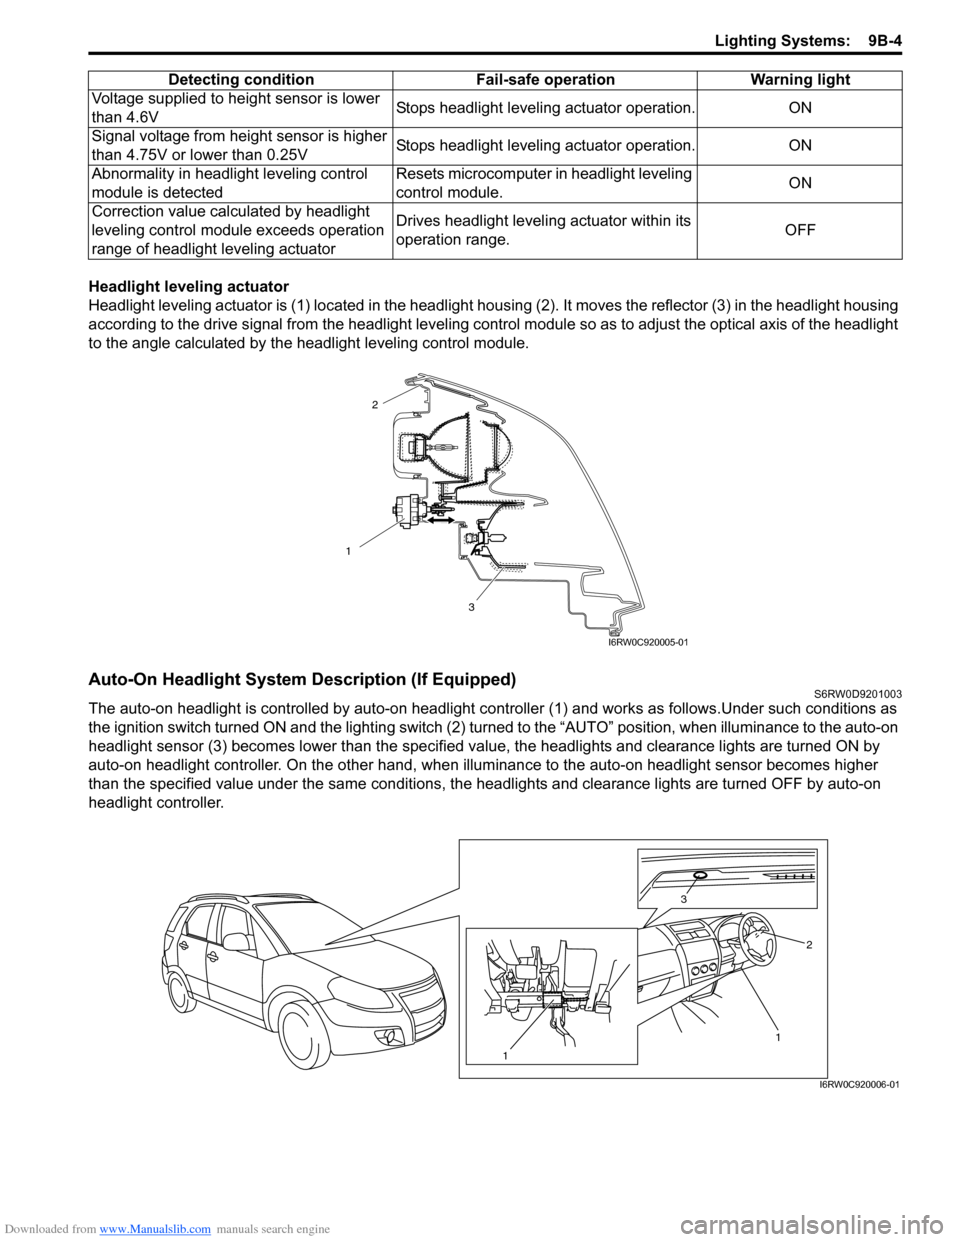 SUZUKI SX4 2006 1.G Service Workshop Manual Downloaded from www.Manualslib.com manuals search engine Lighting Systems:  9B-4
Headlight leveling actuator
Headlight leveling actuator is (1) located in the headlight housing (2). It moves the refle